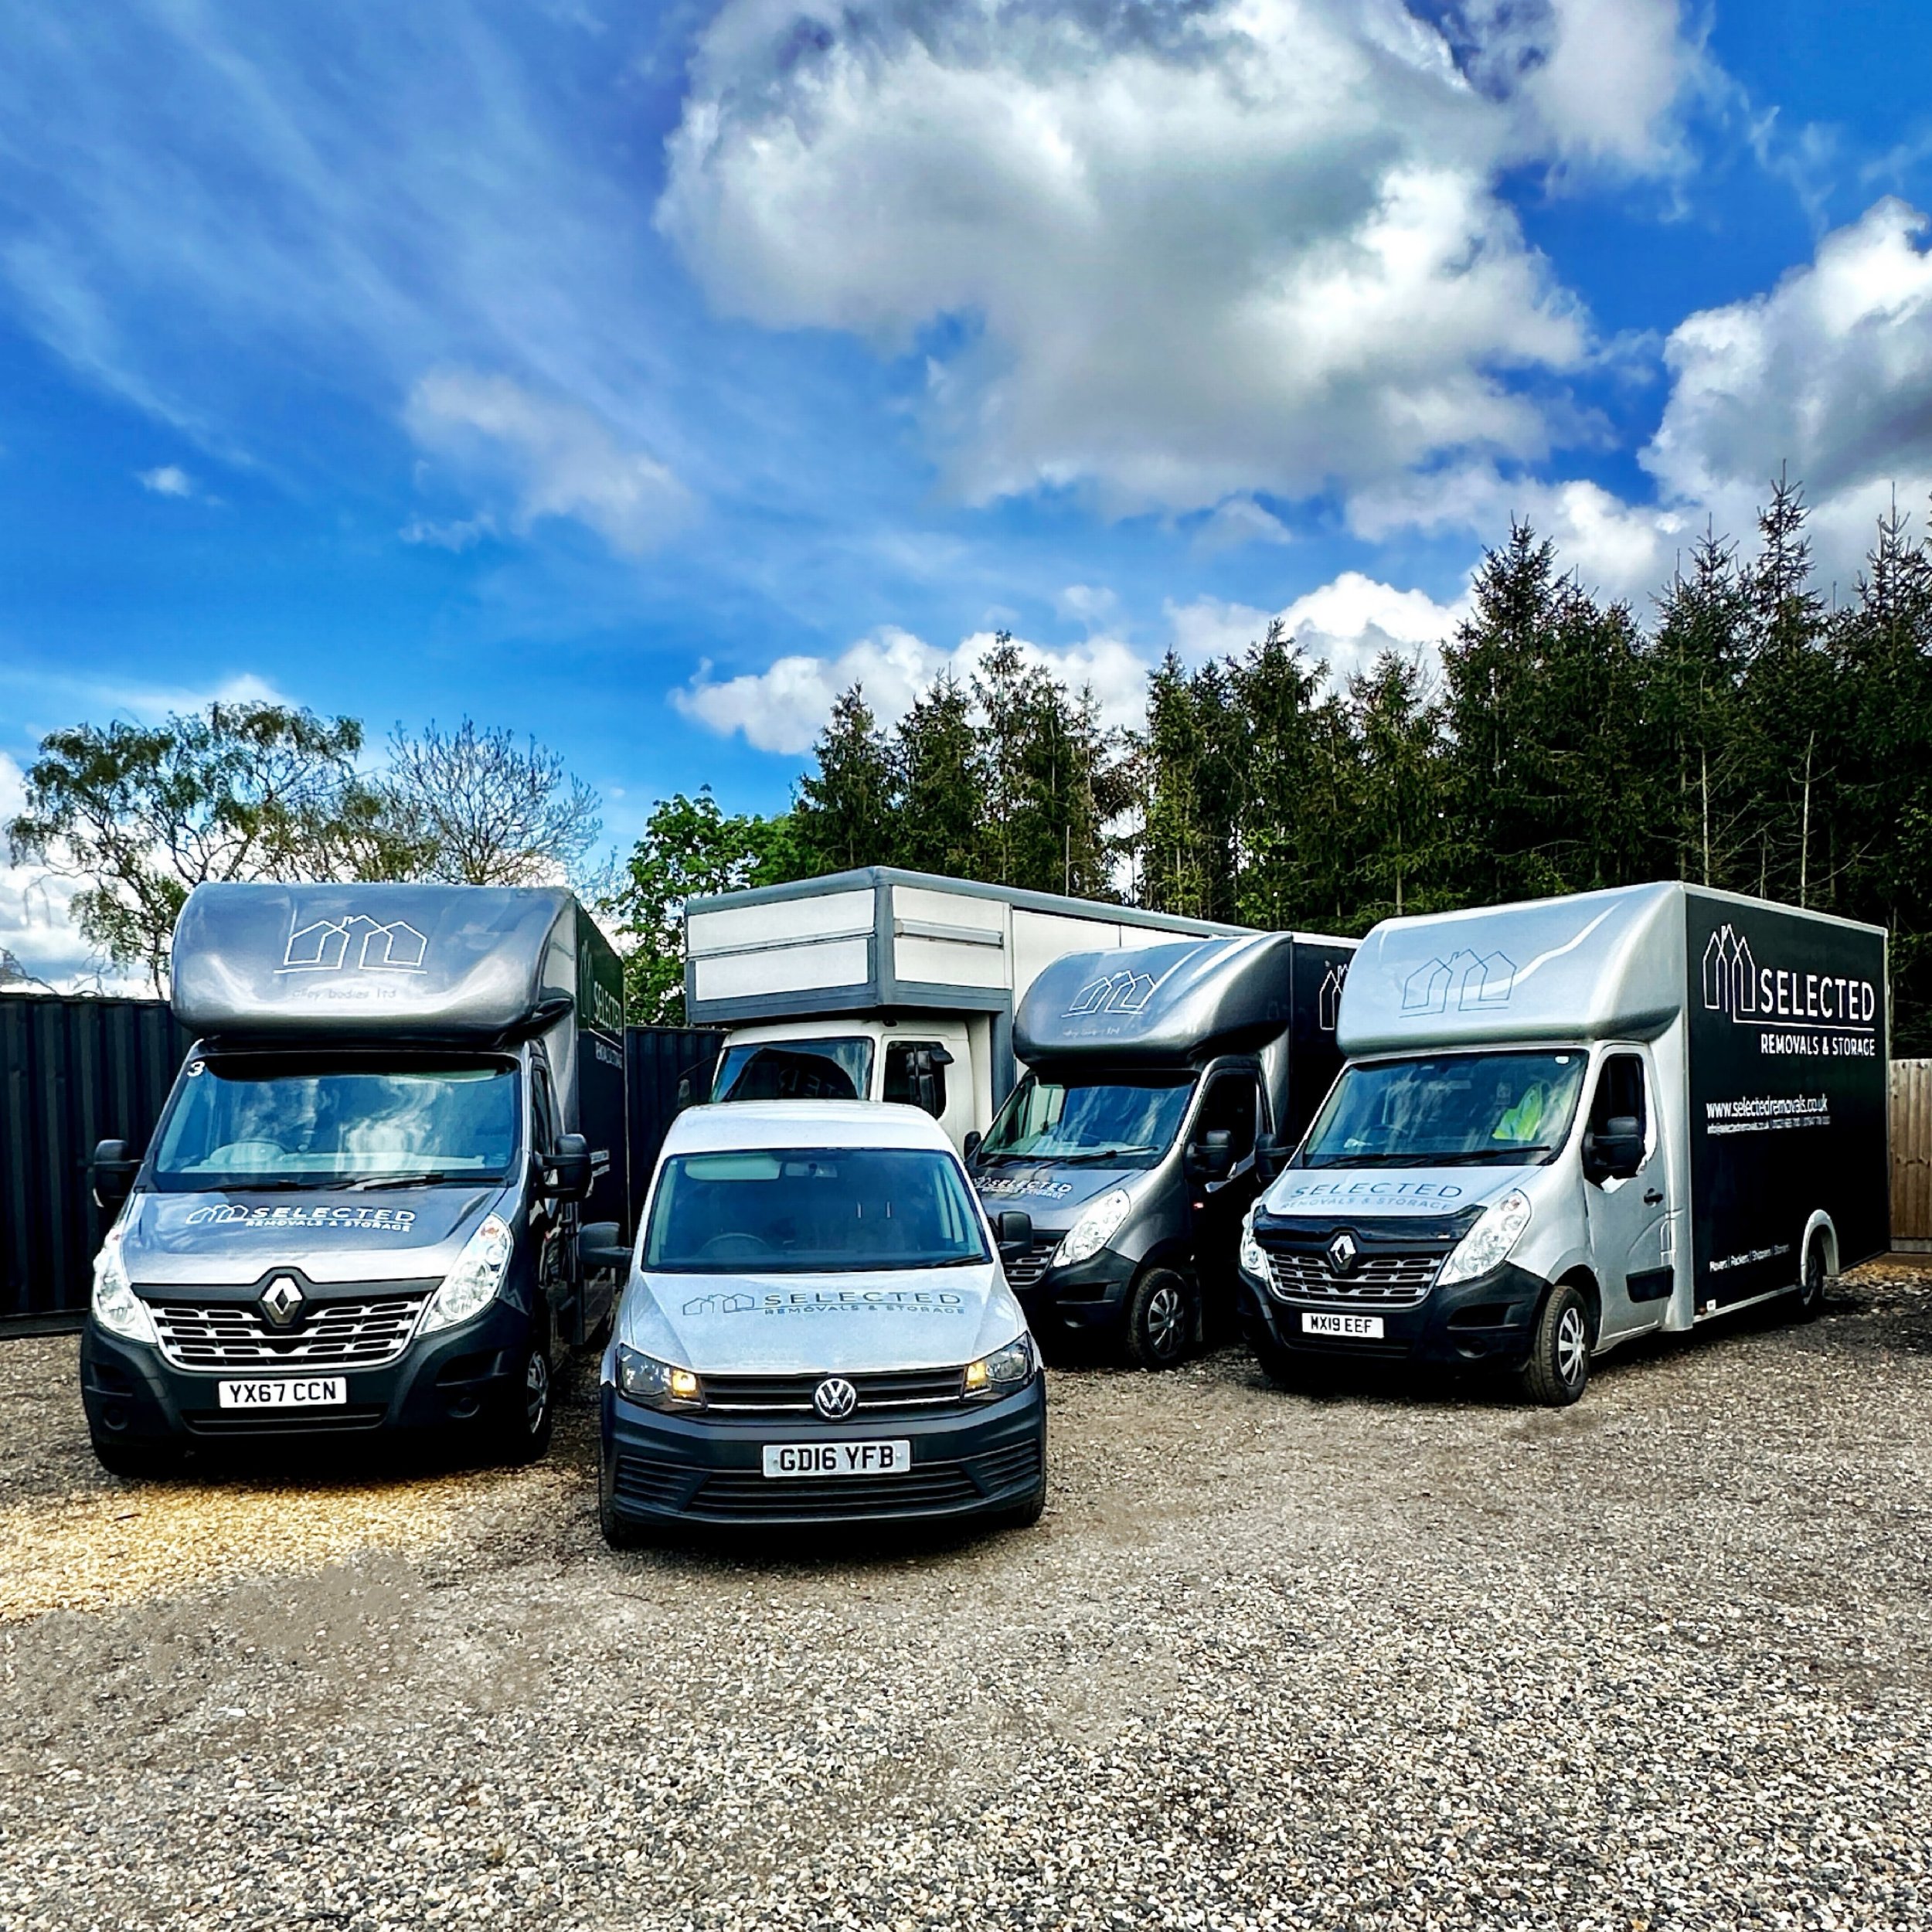 Introducing our fleet for the summer of 2024! 🚙🚚🚚🚚🚛

We look forward to being of service 🏠📦☀️

#moving #localbusiness #independentcambridge #cambridge #removals #housemove #growth #wecontinue #lorry #vans